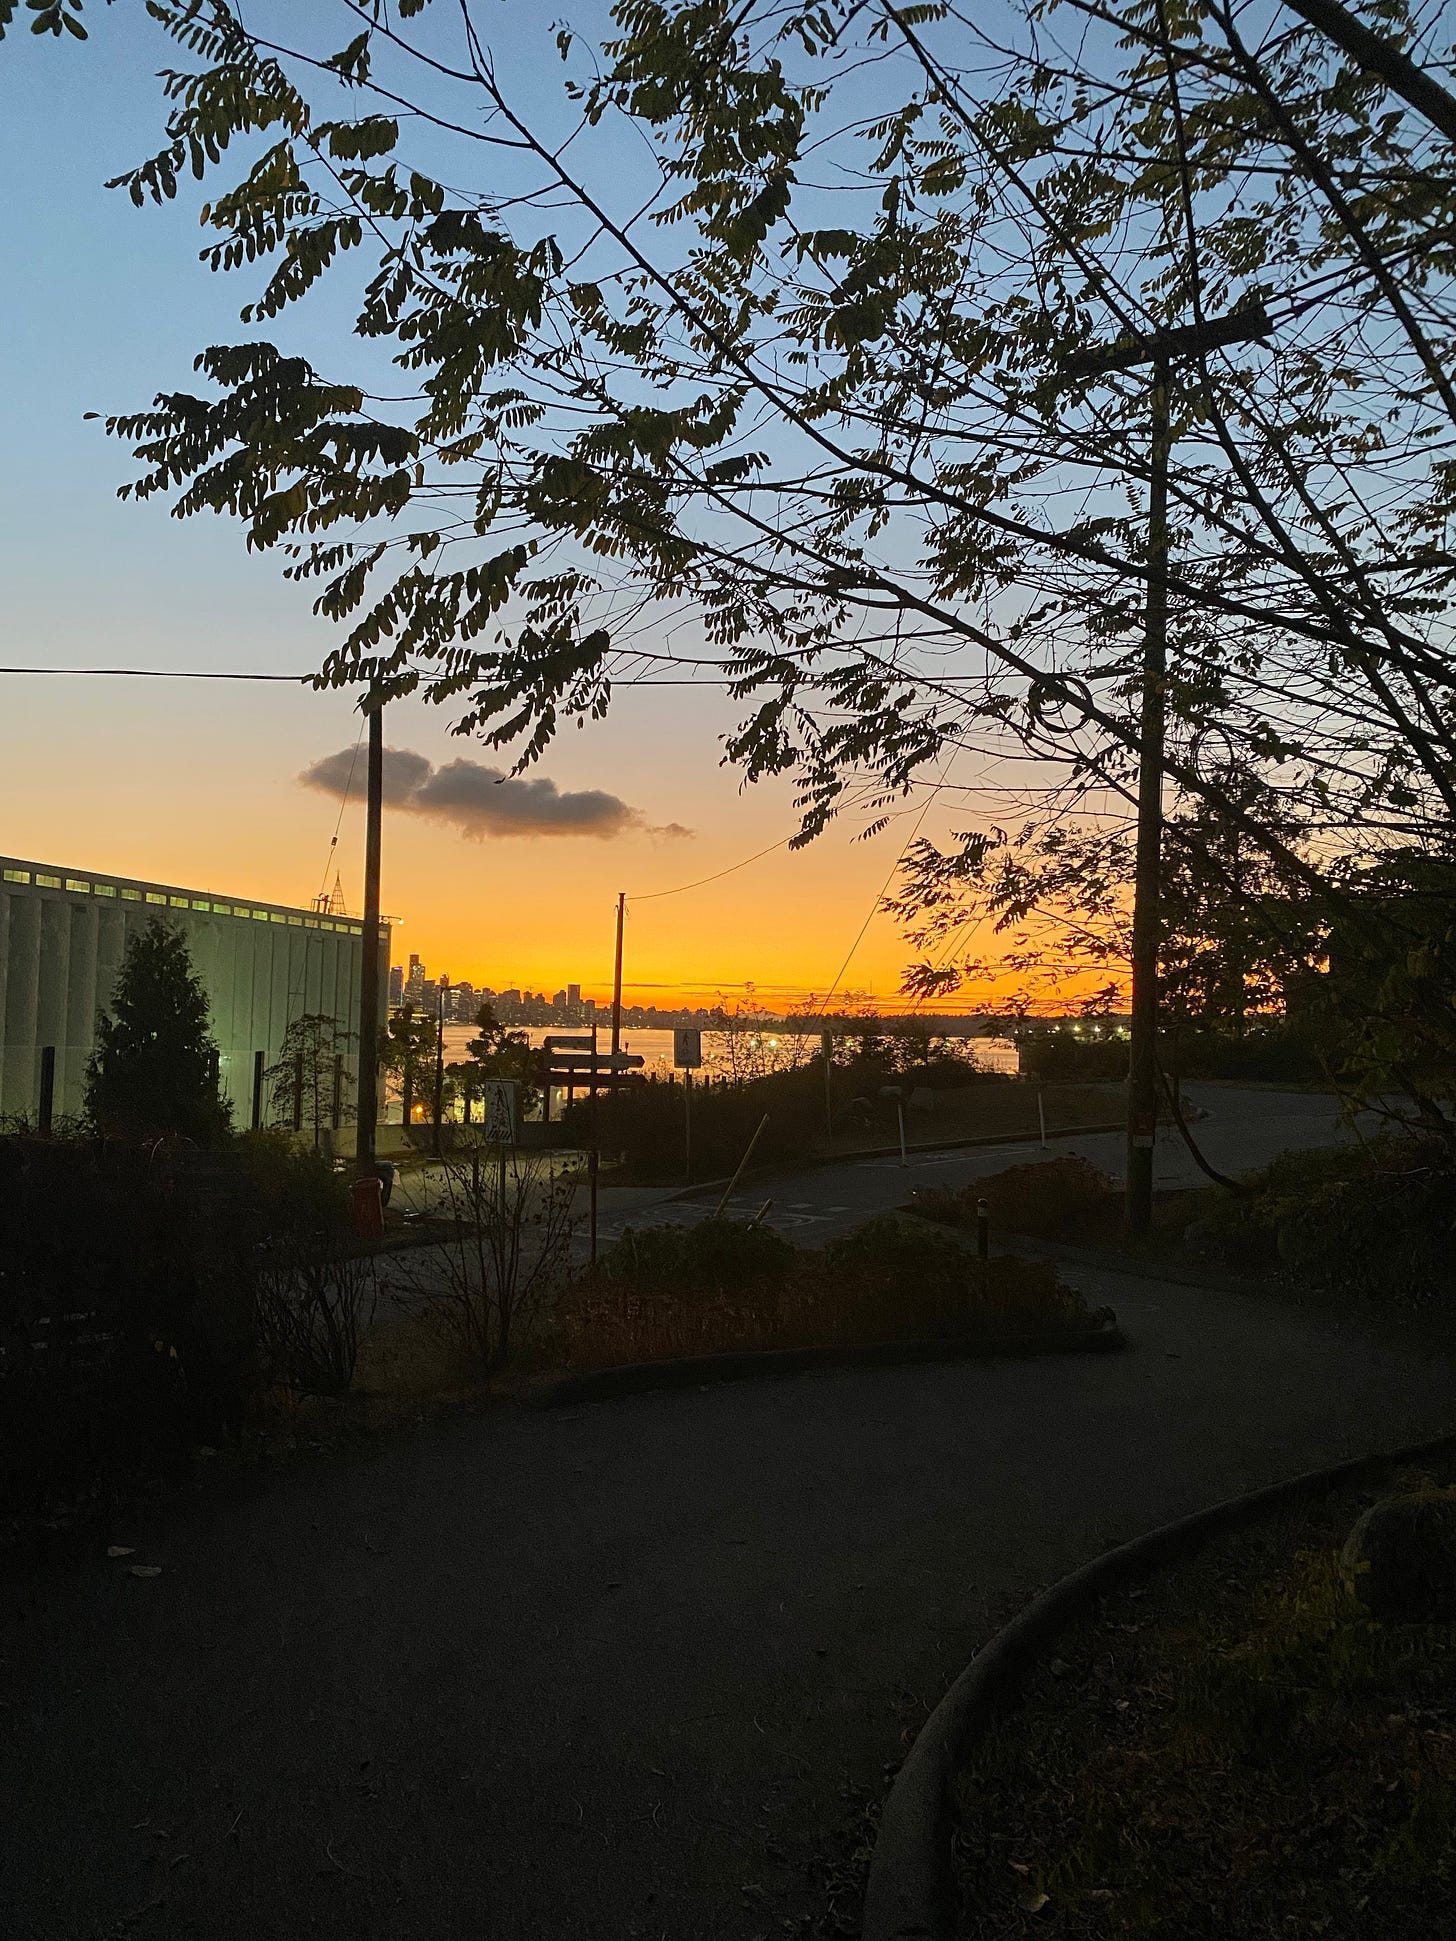 A faraway view of the Vancouver skyline from the North Shore, the sunset orange and gold behind it. A single fluffy cloud floats above it. In the foreground is a dim view of a paved bike path, framed by the leaves of a hawthorn tree.